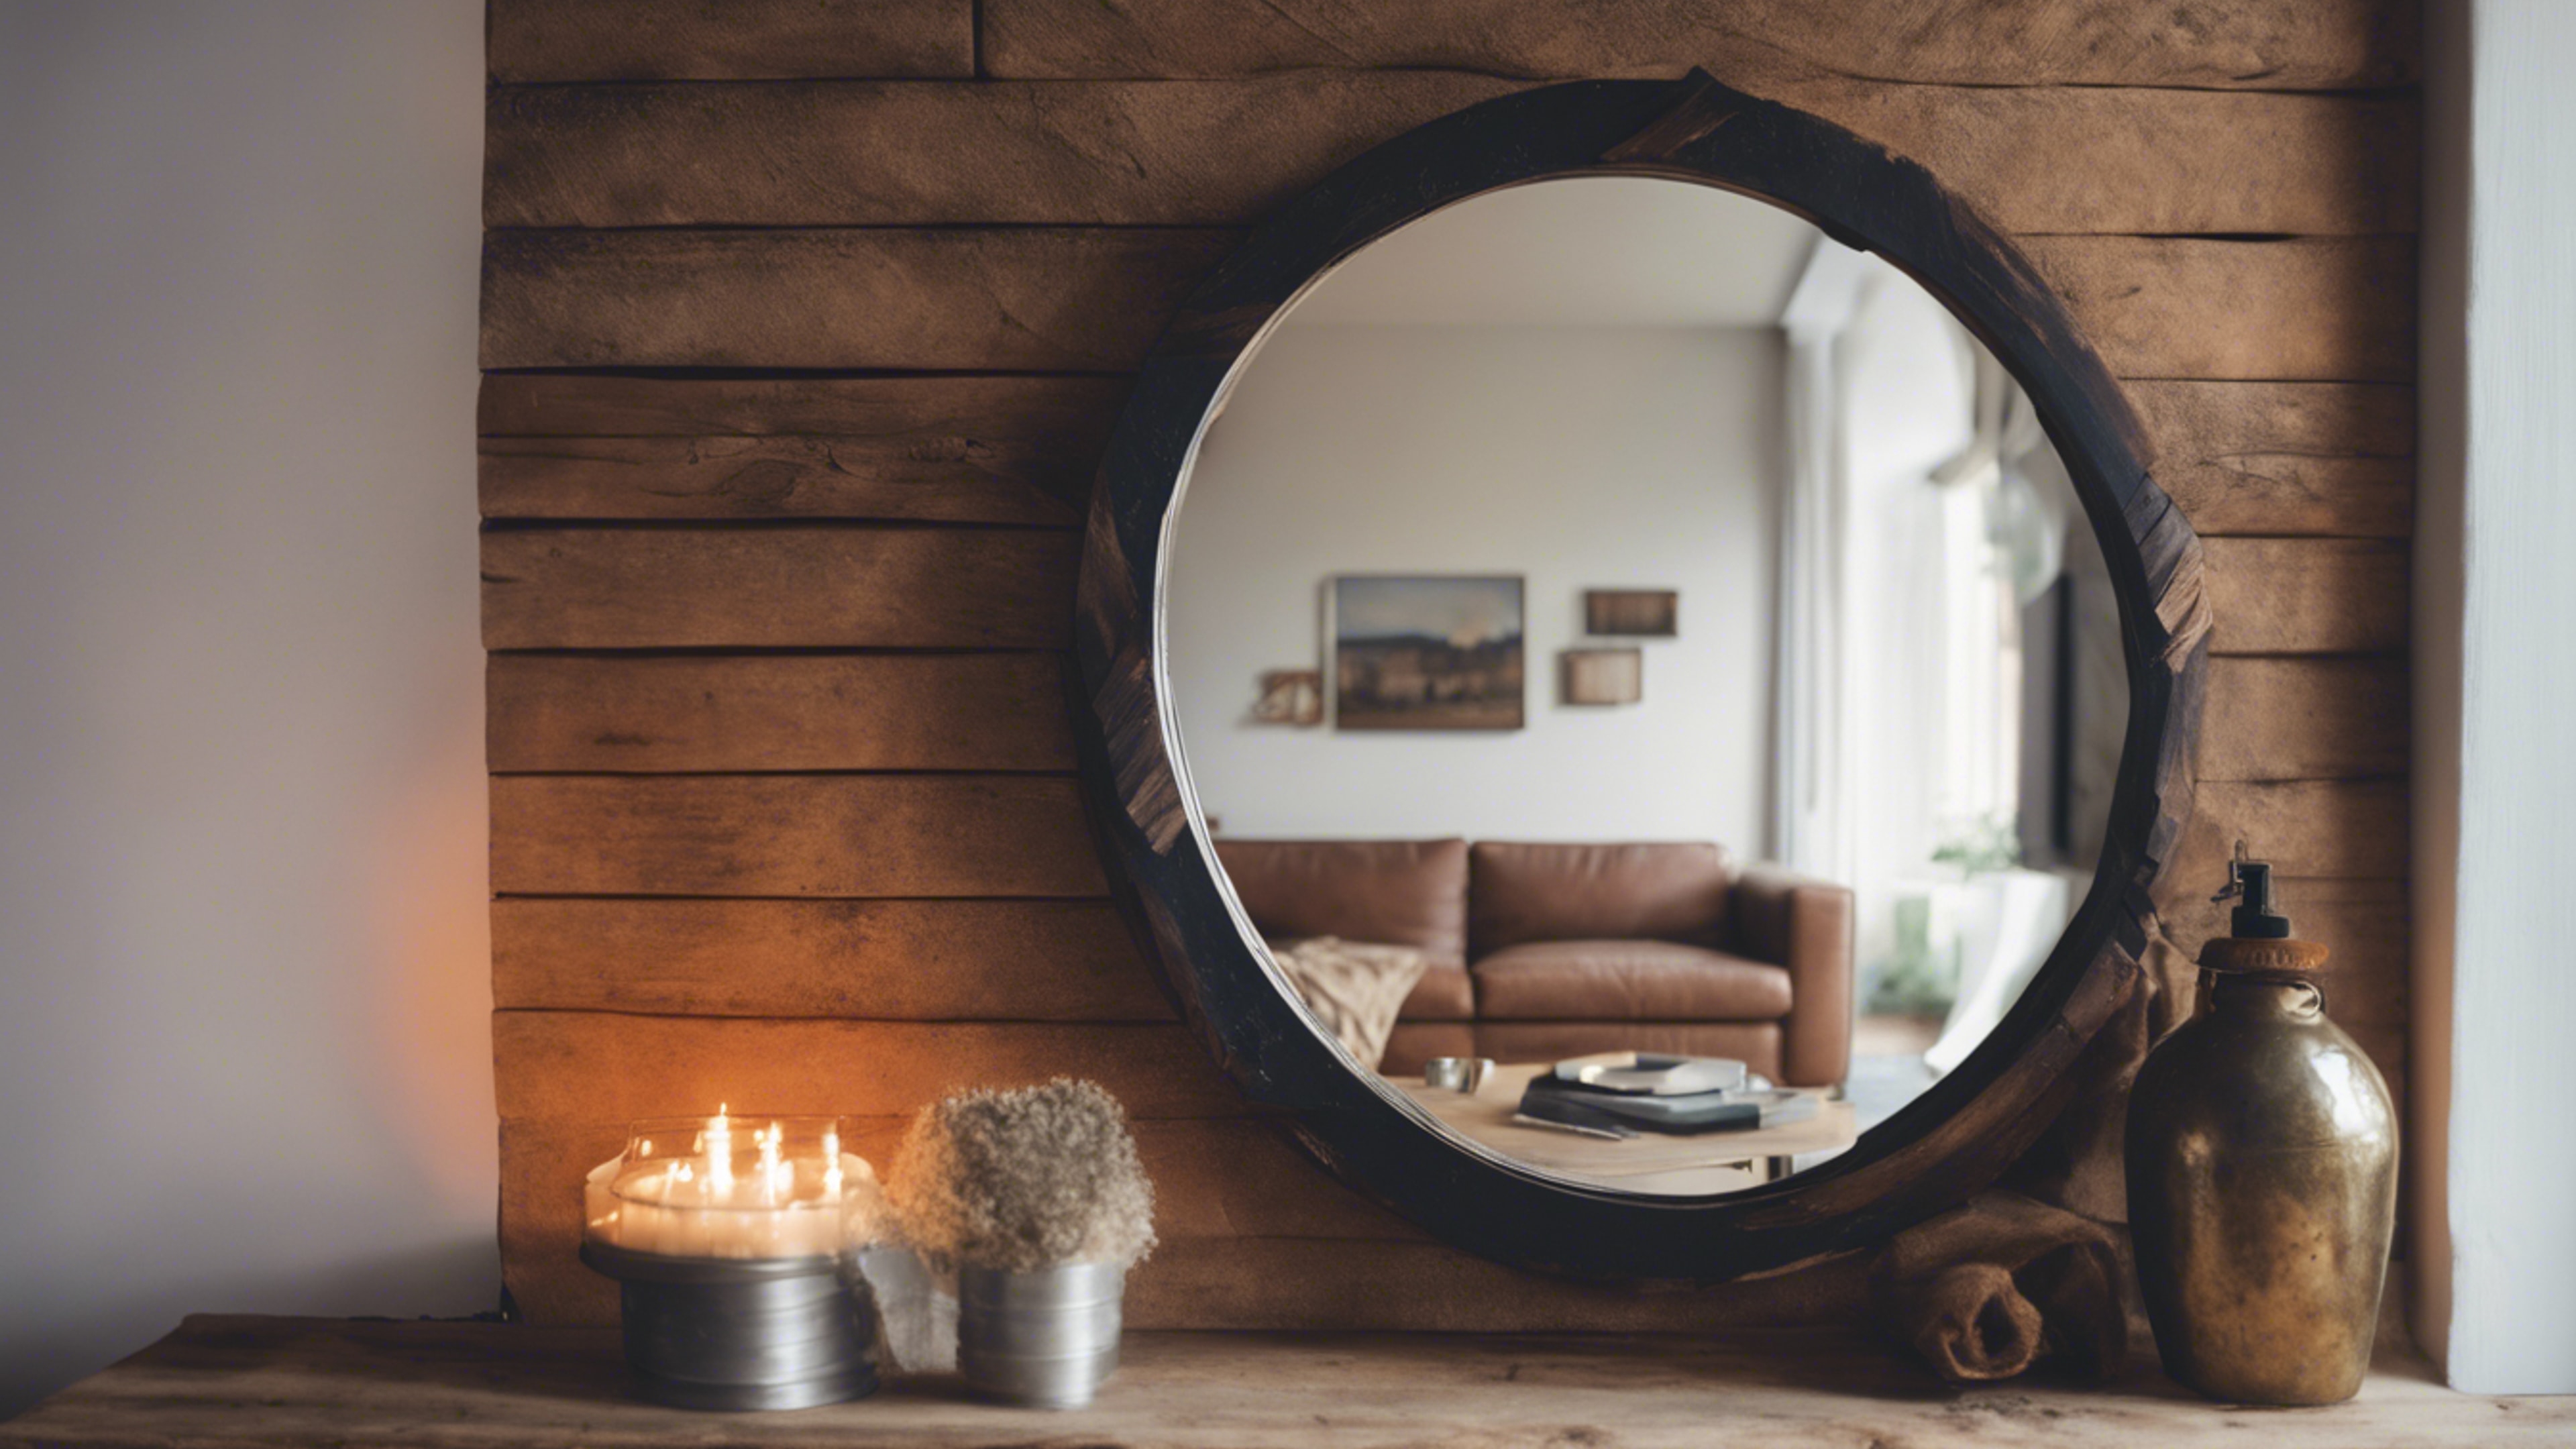 A perfectly round mirror hanging above a cozy fireplace in a rustic living room.壁紙[a531468a9e644e05aaab]